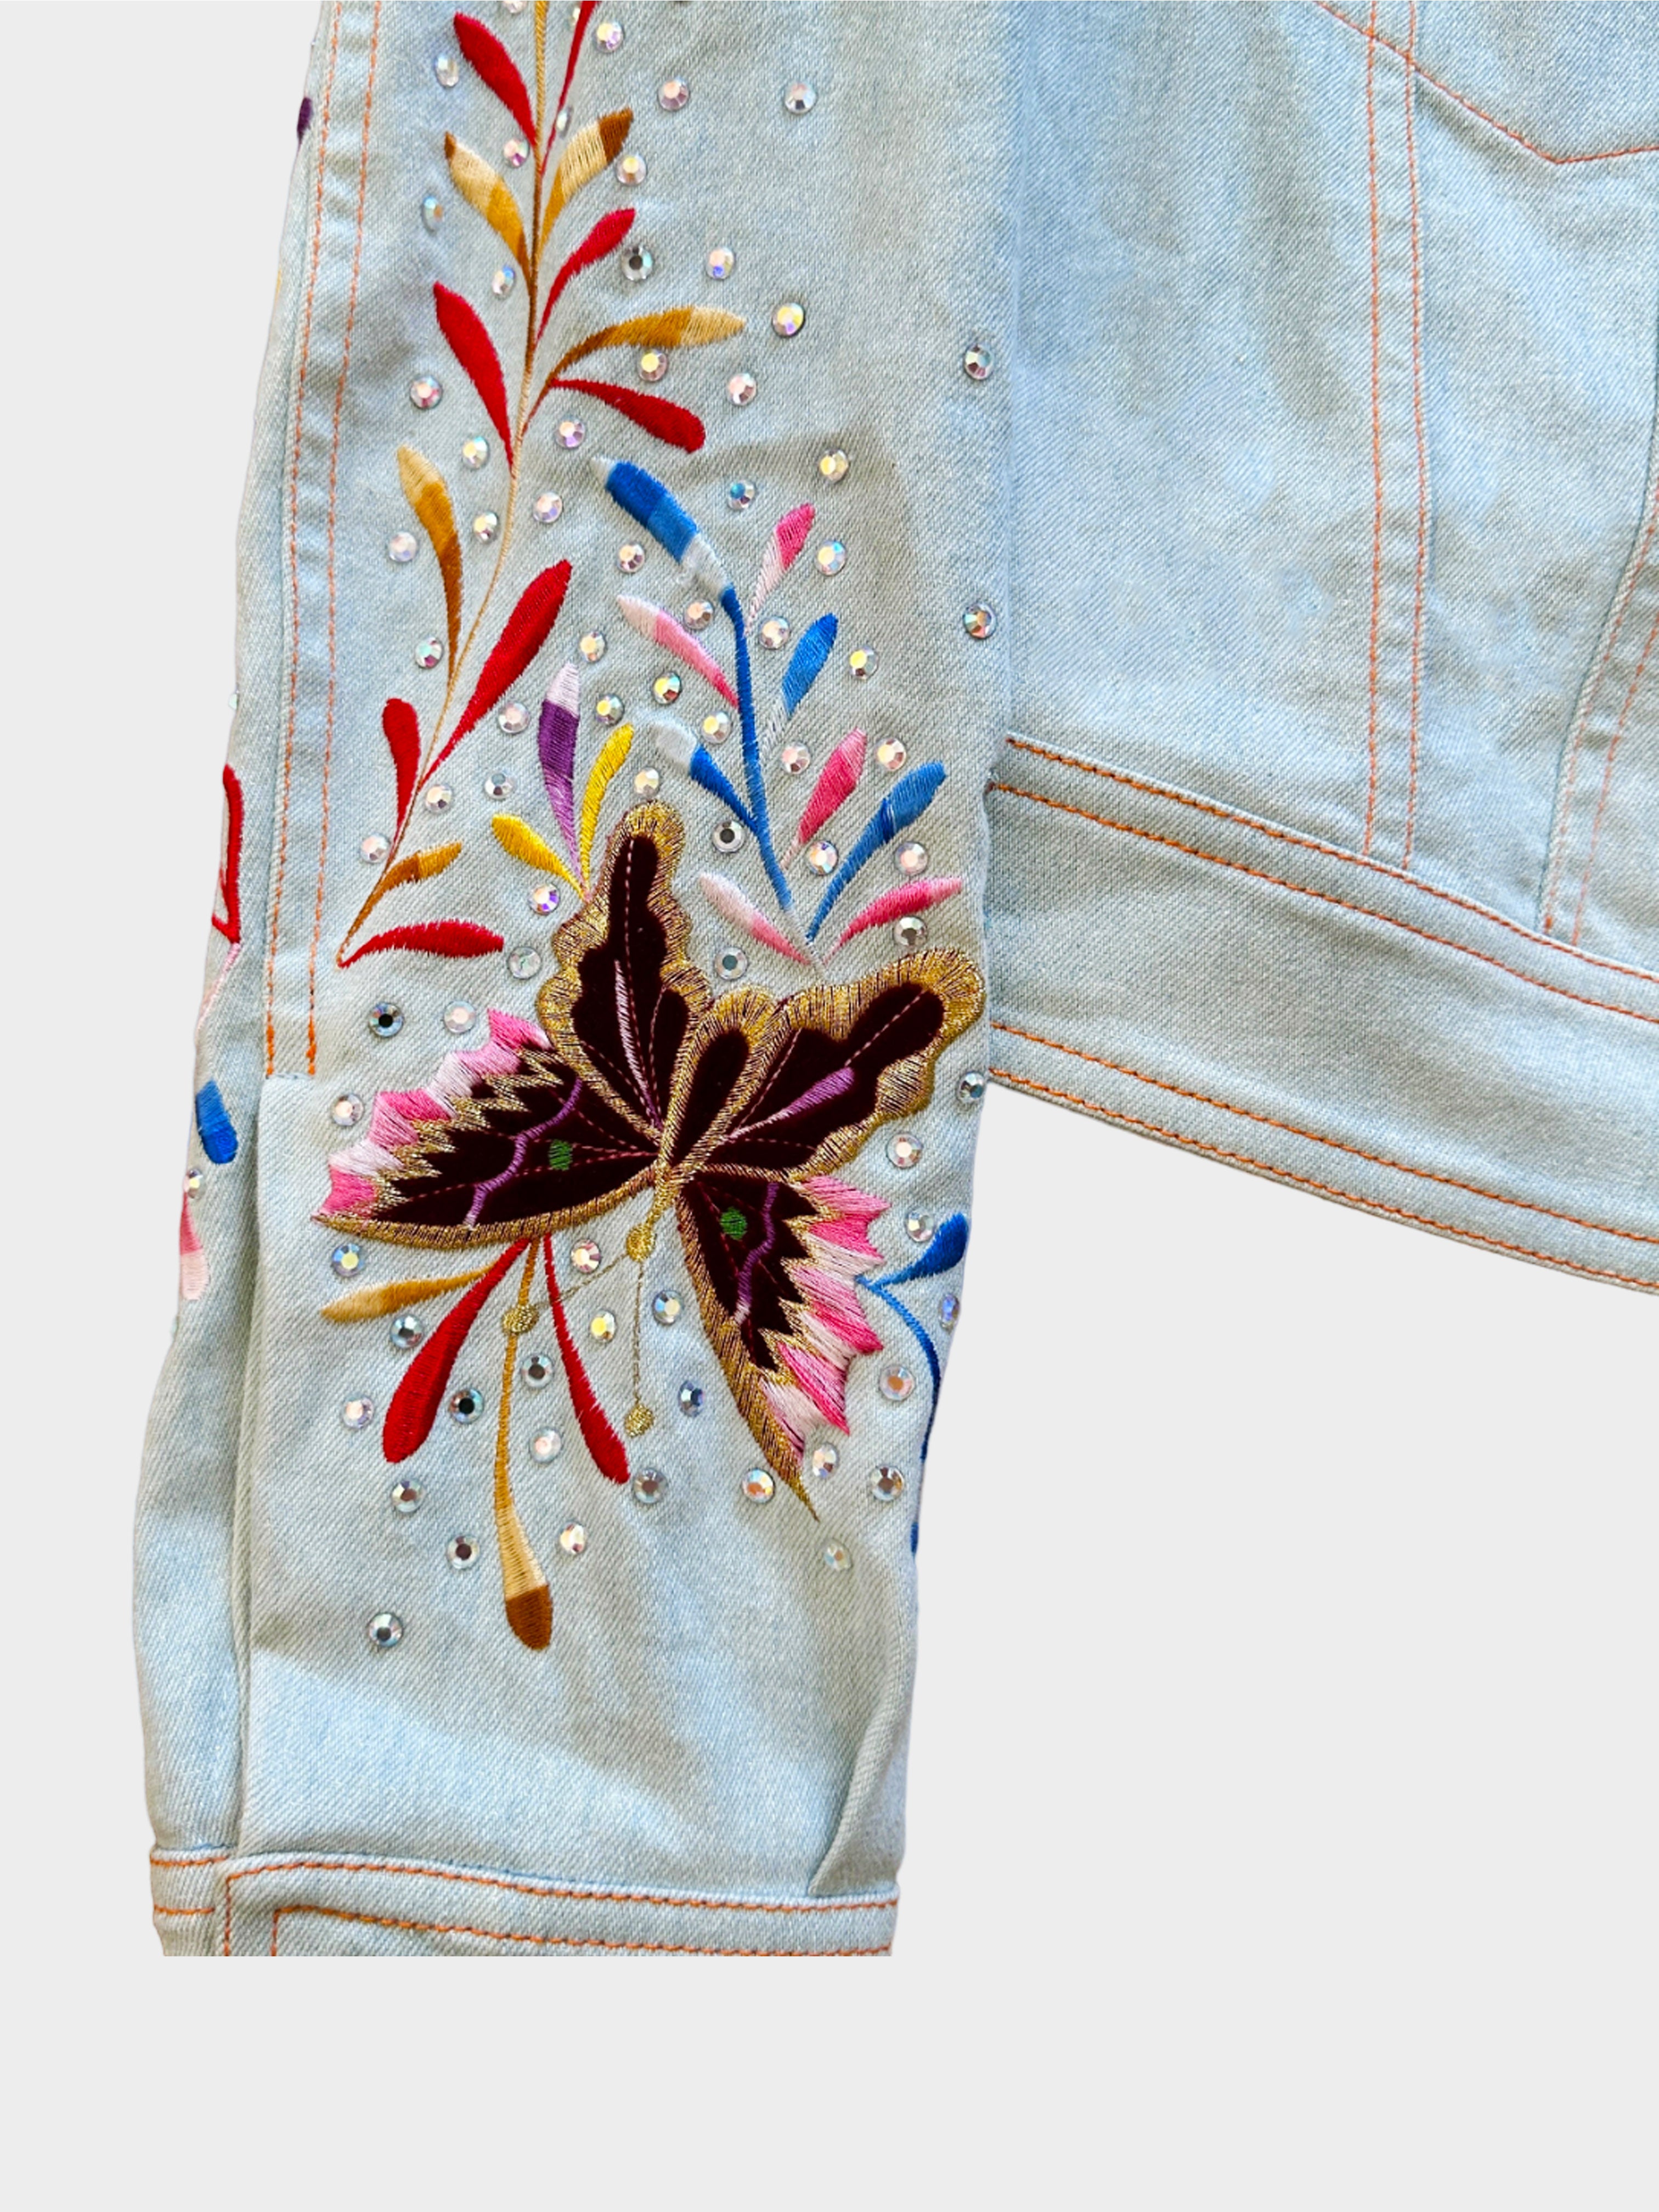 Christian Dior by John Galliano 2002 Butterfly Embroidered Denim Jacket